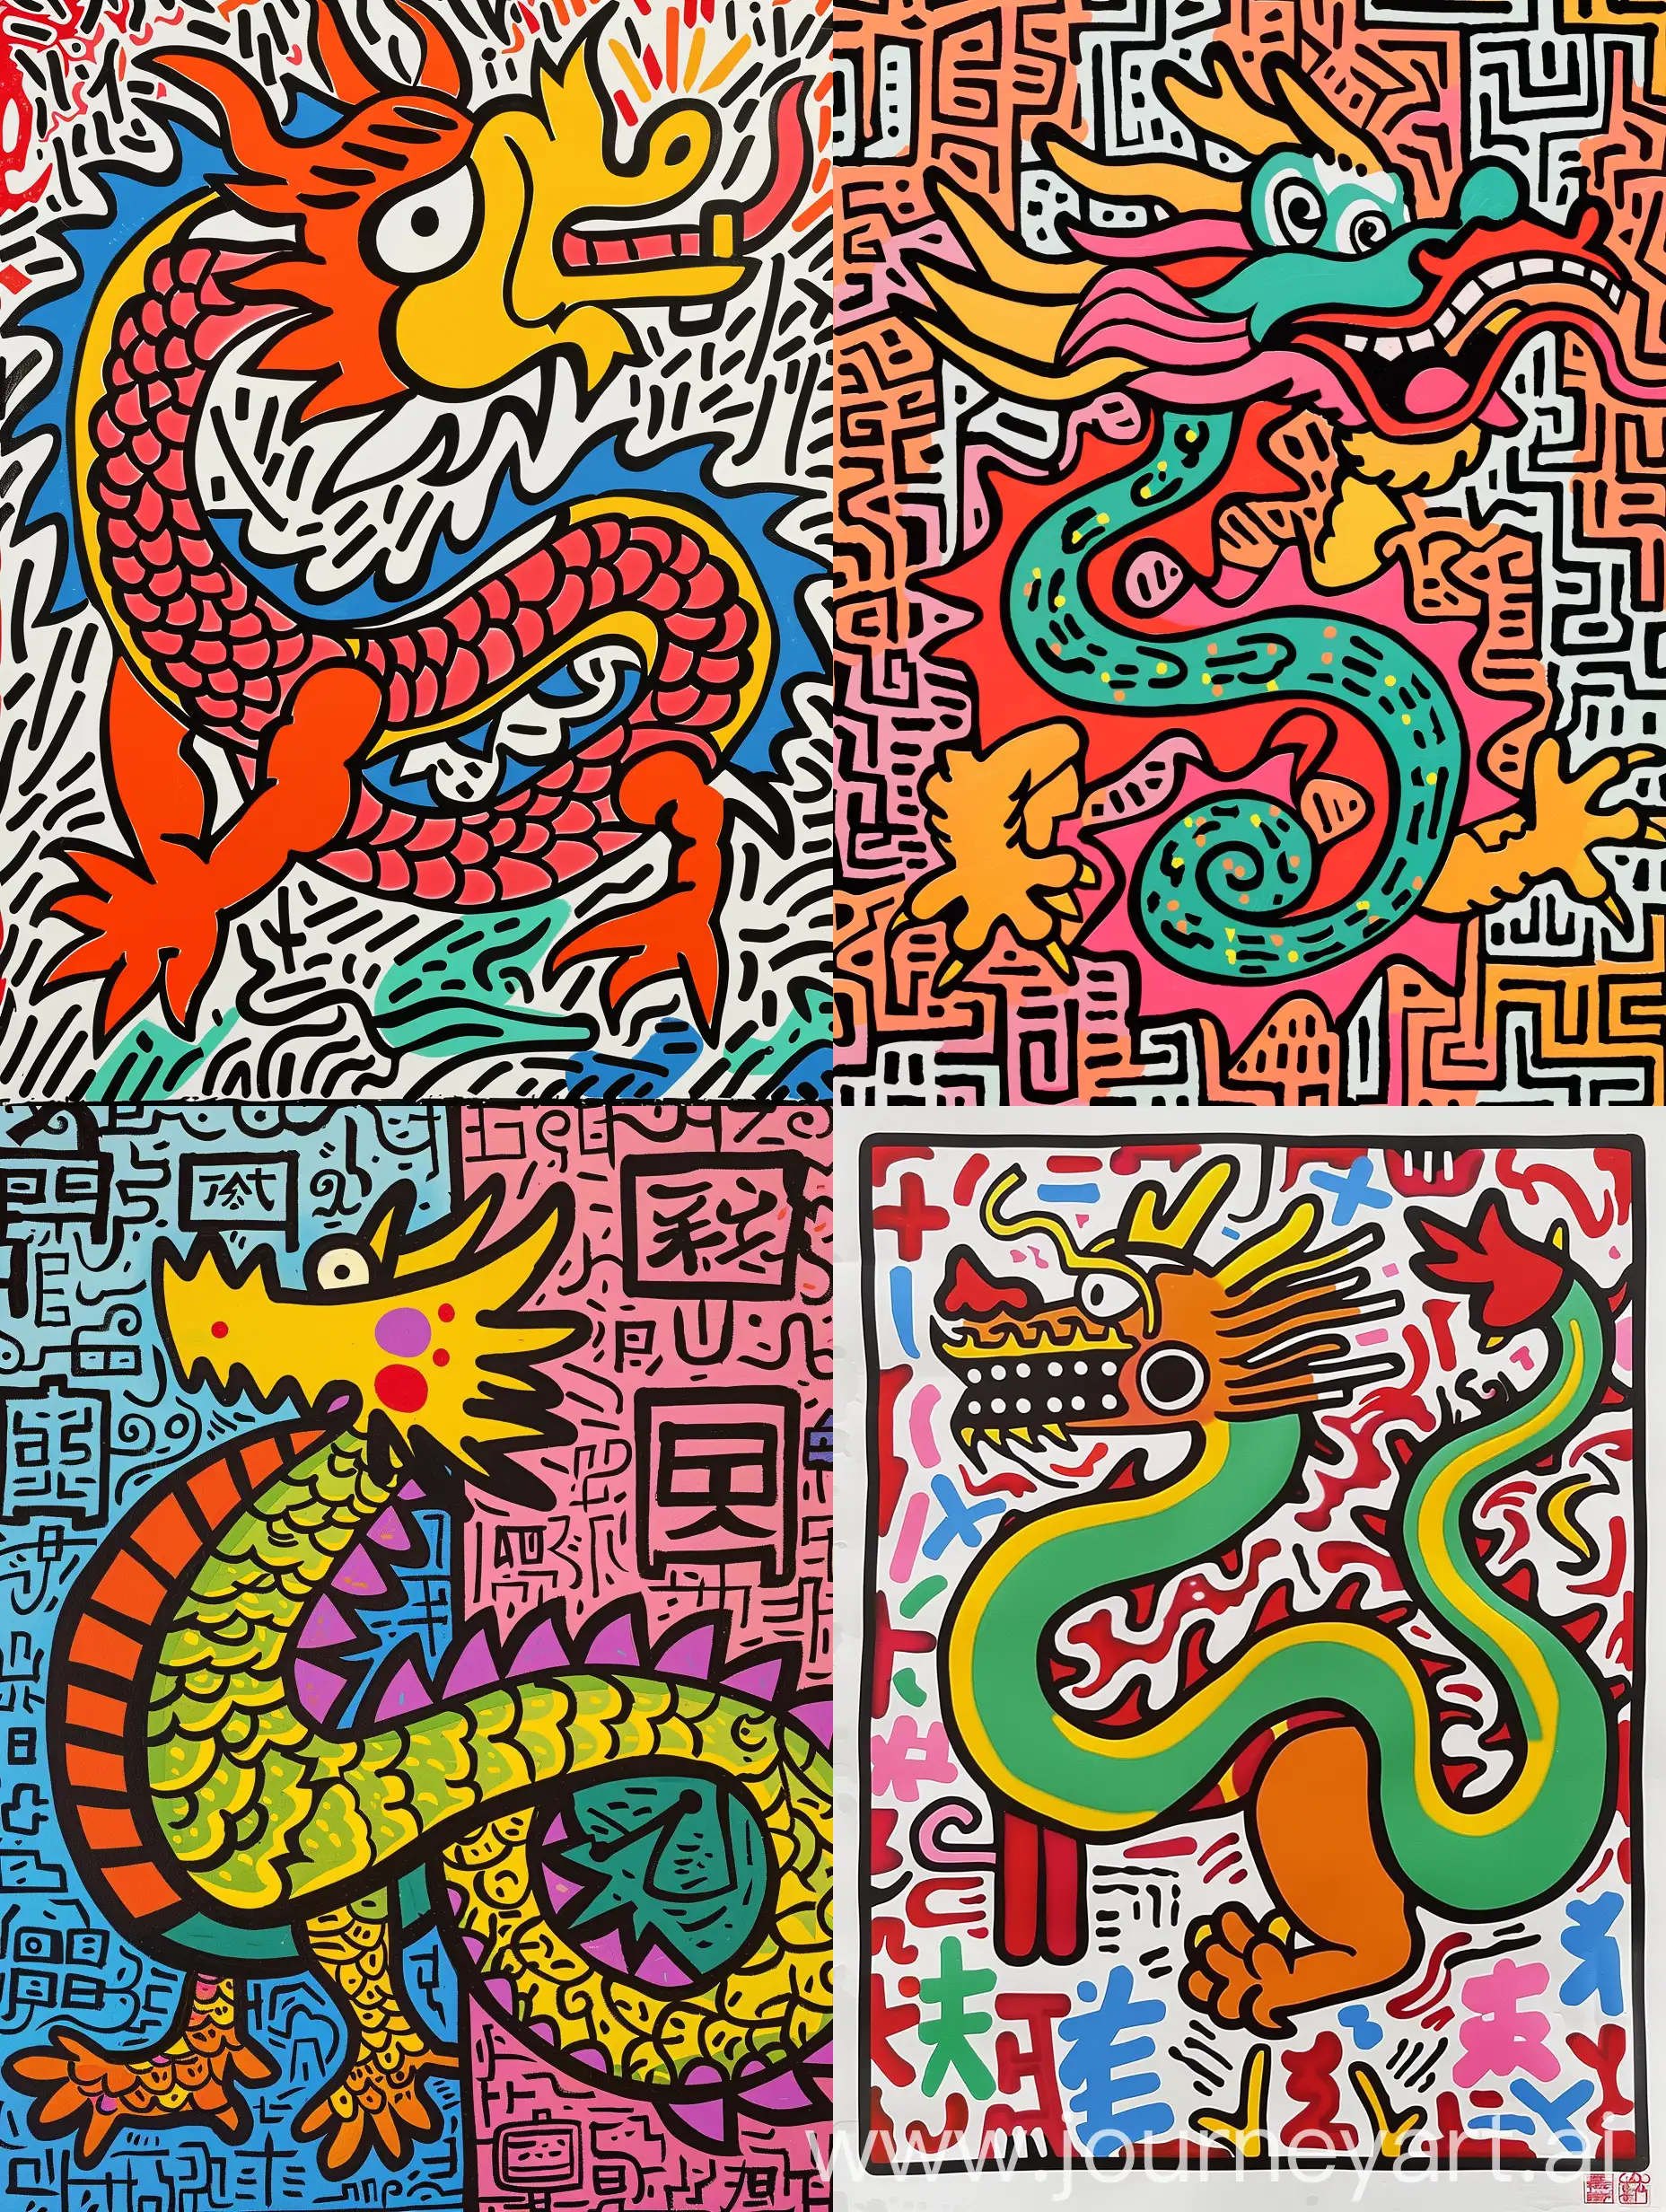 Celebrating-Festive-Chinese-Dragon-Art-in-the-Style-of-Keith-Haring